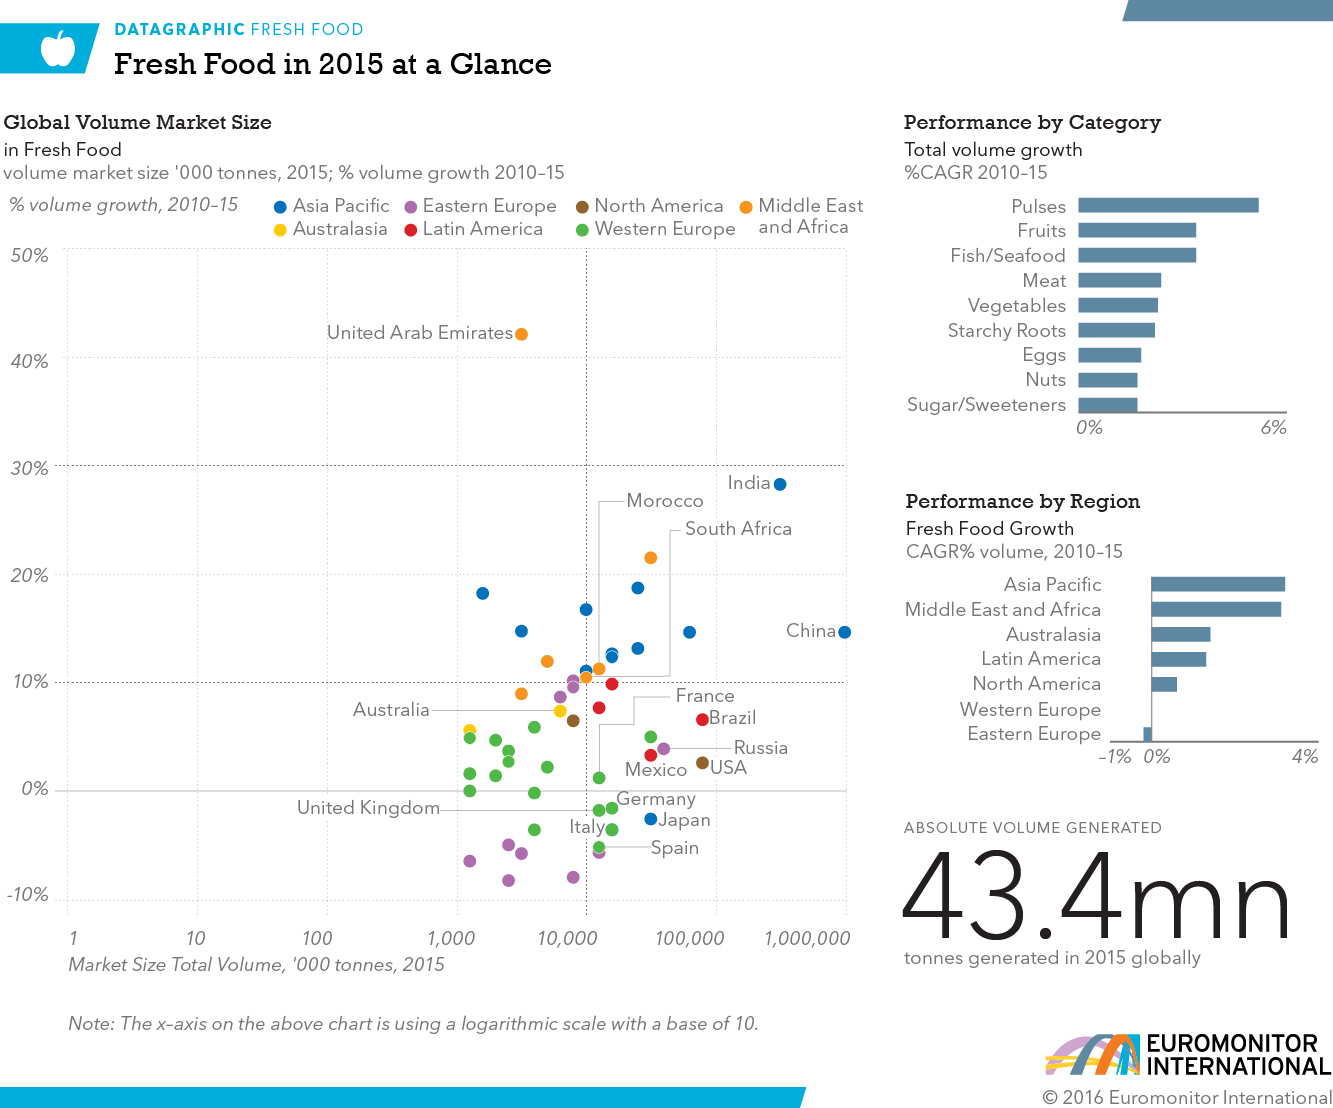 fresh-food-at-a-glance-2015-datagraphic